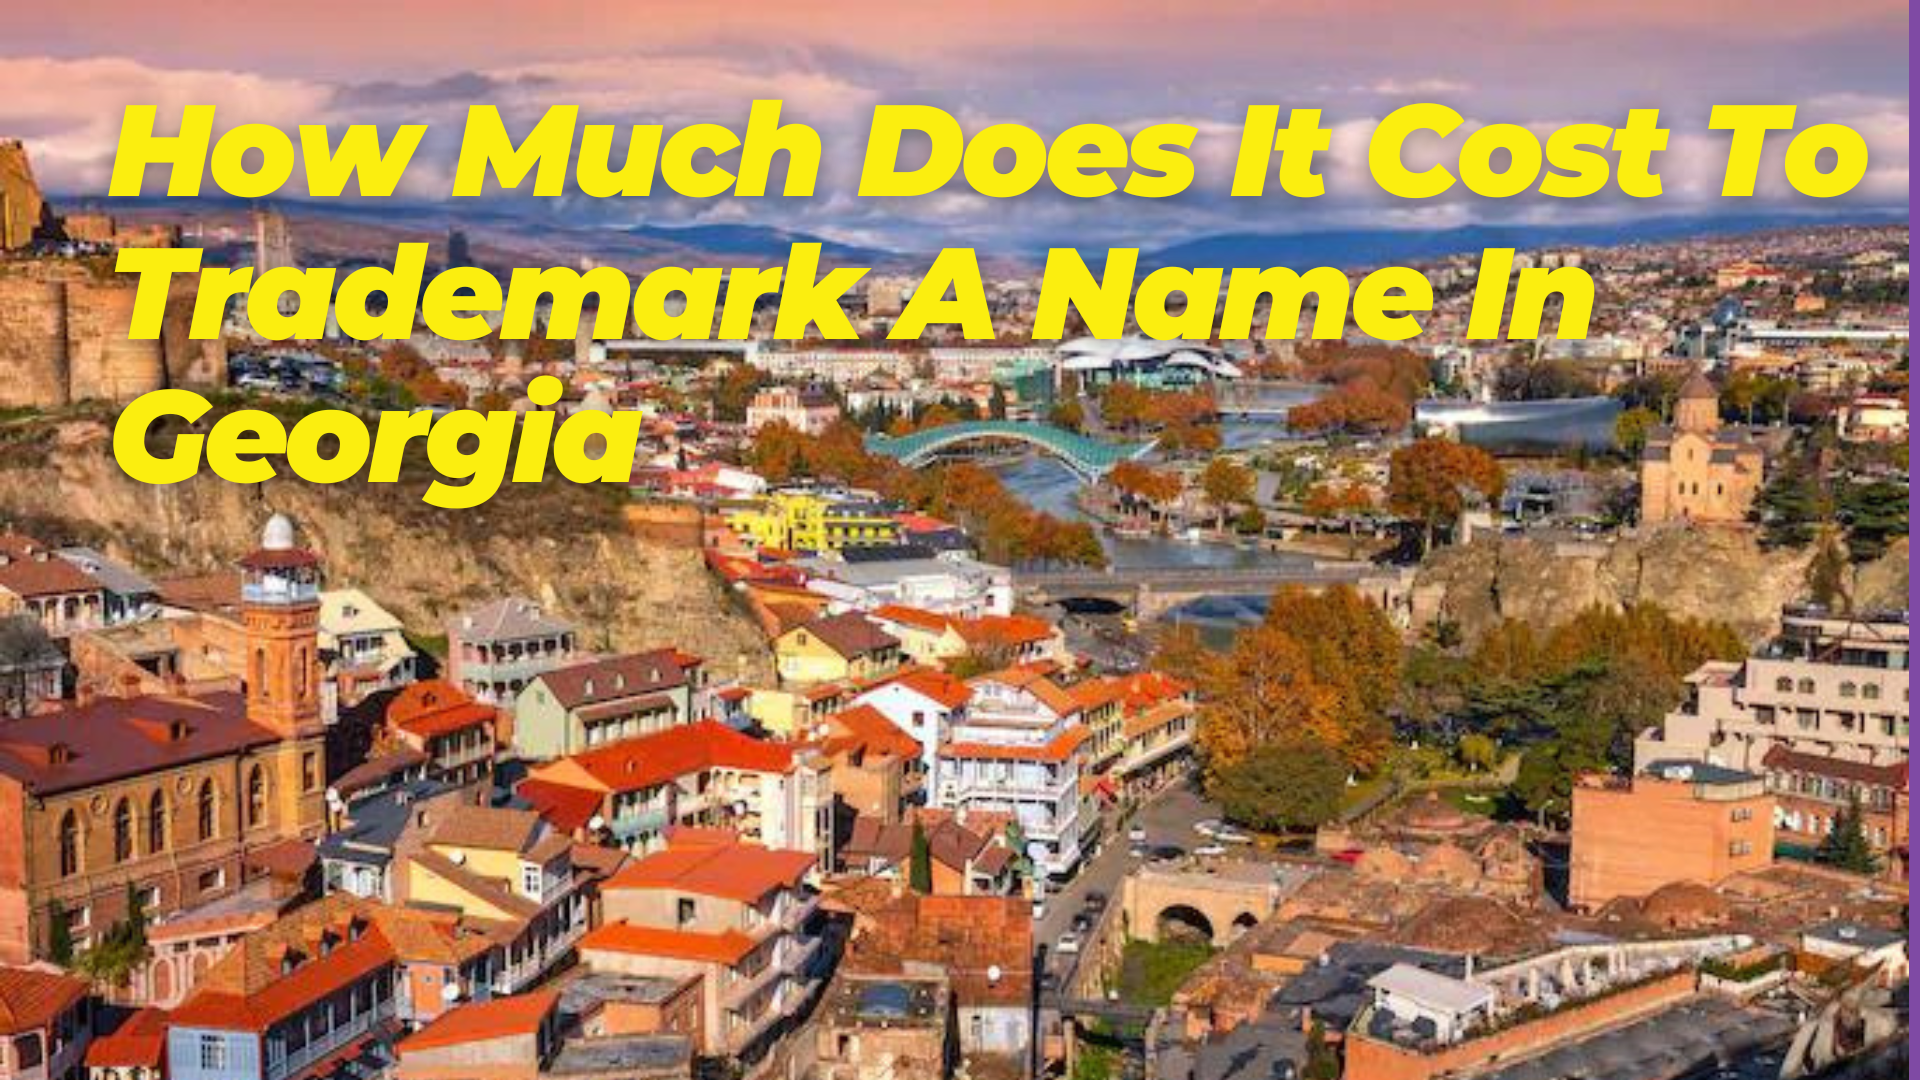 How Much Does It Cost To Trademark A Name In Georgia​